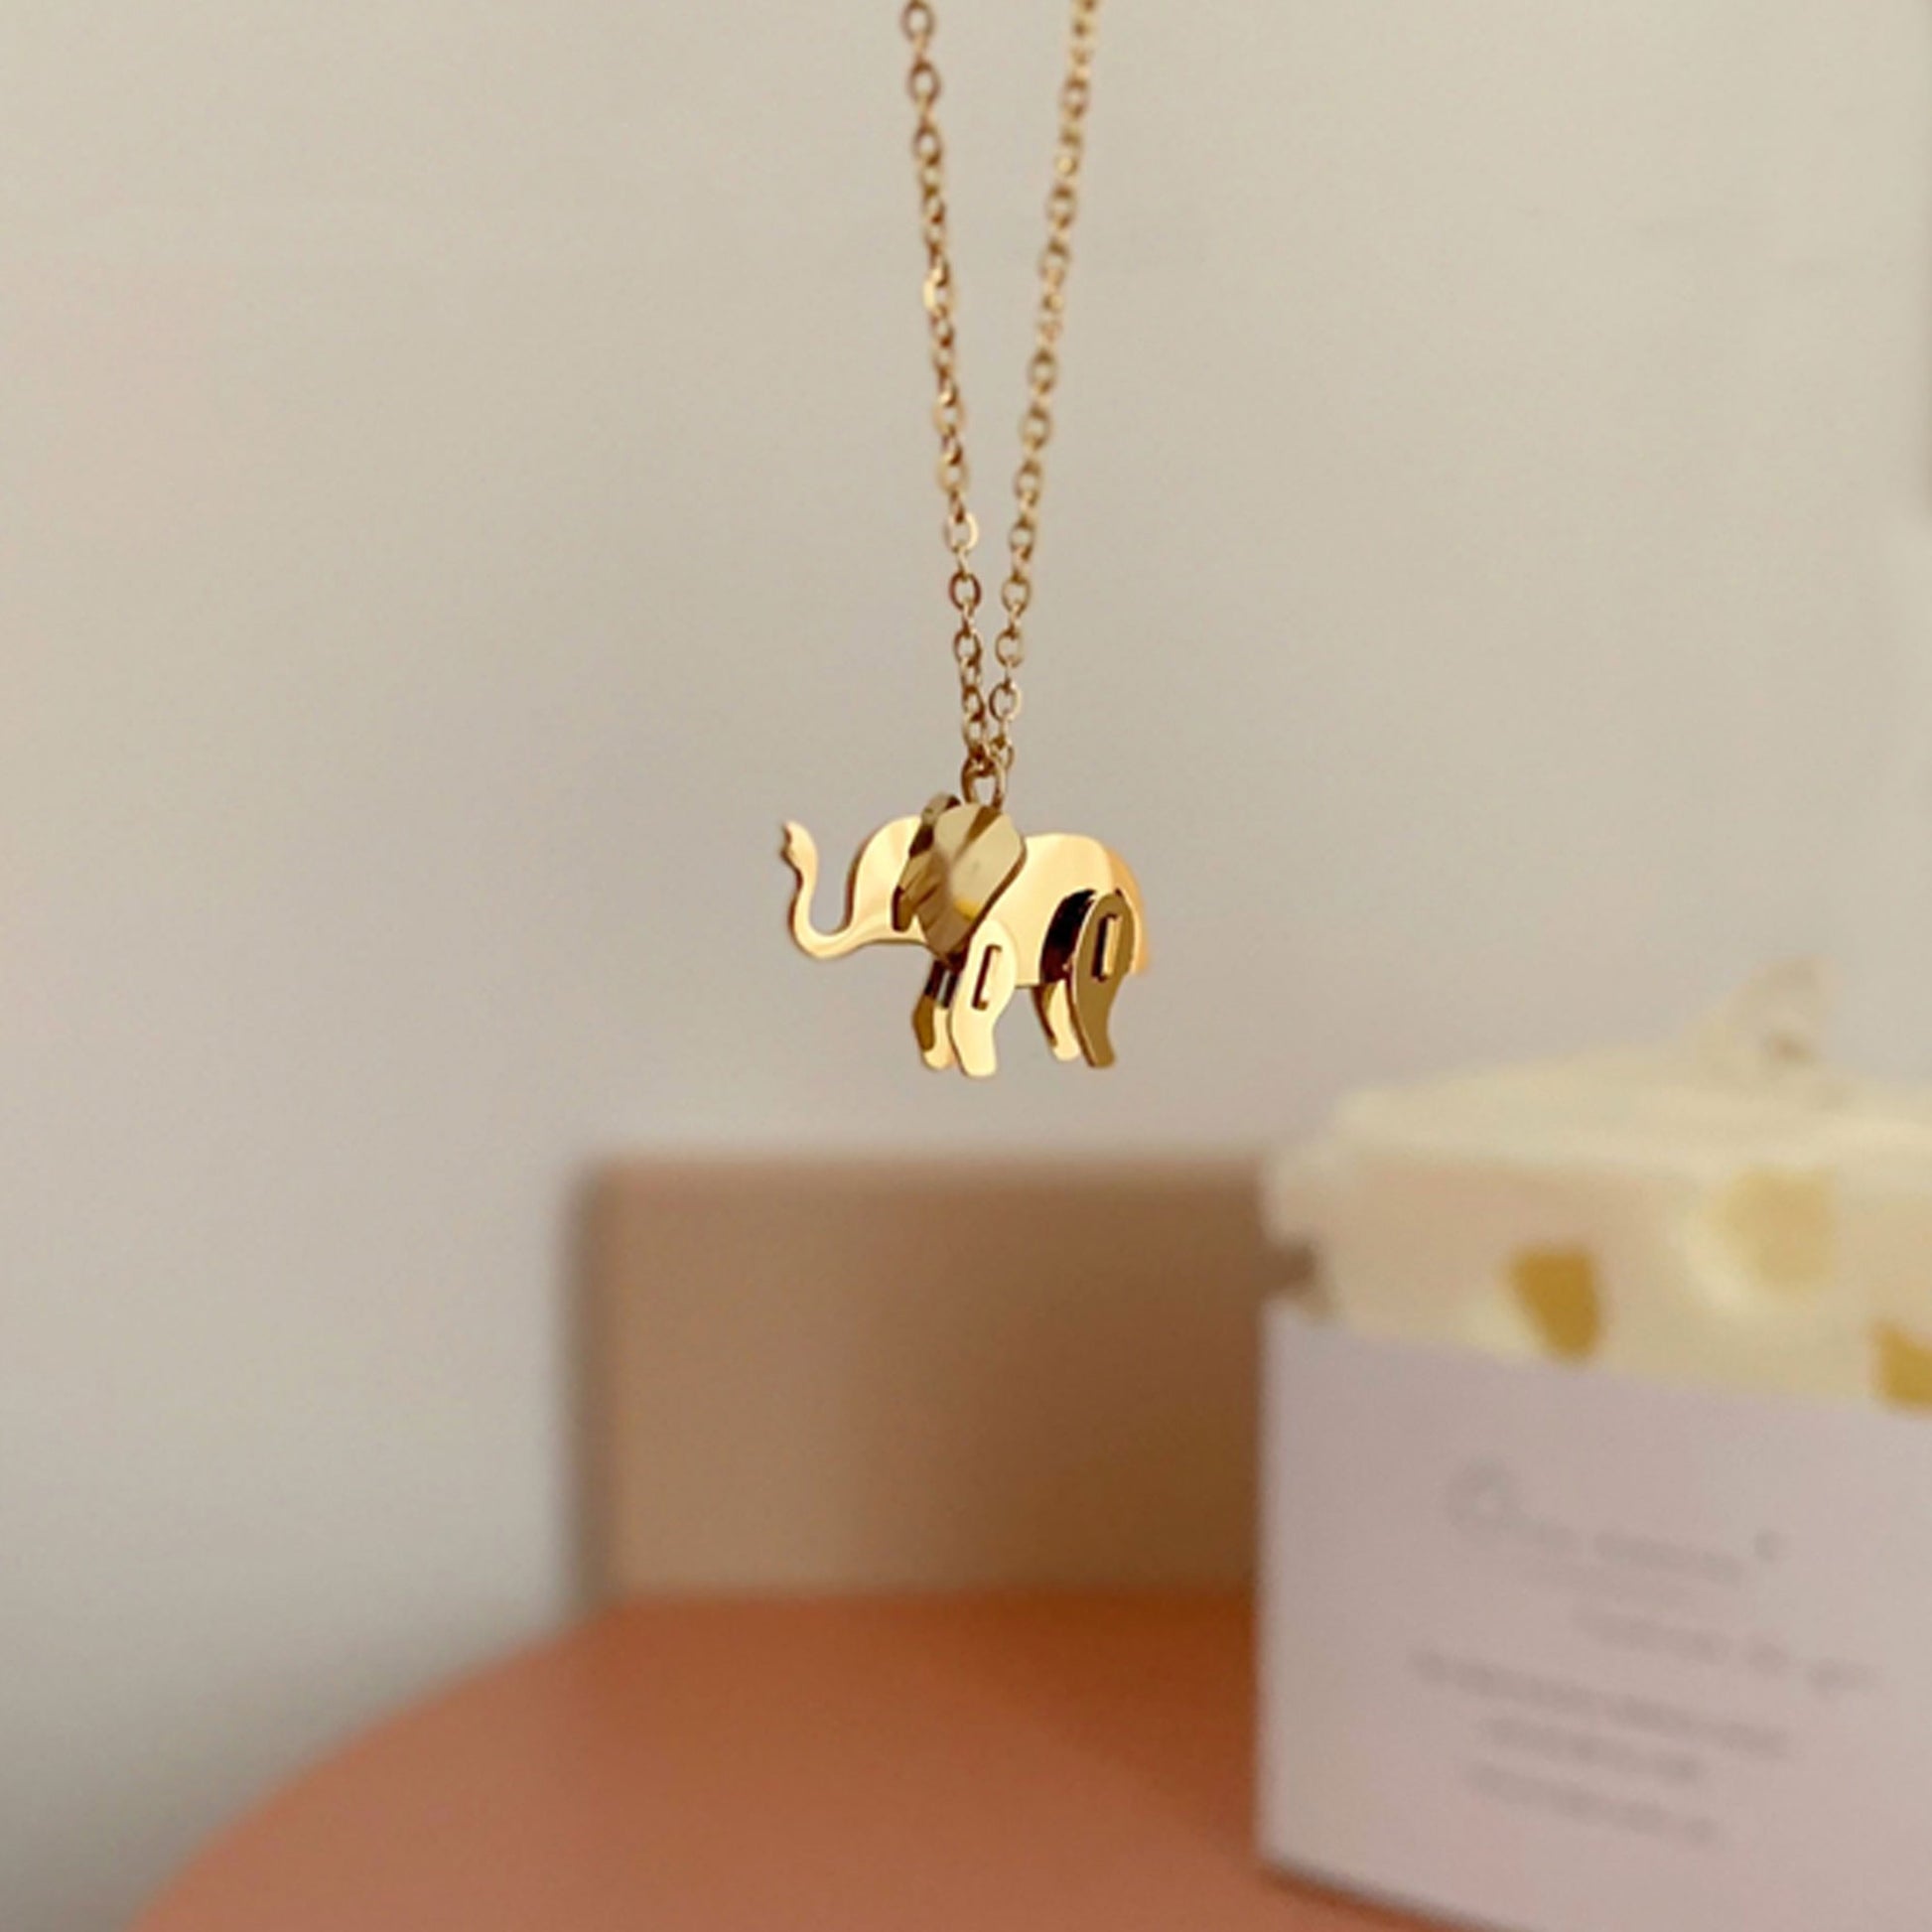 Golden elephant necklace in the air